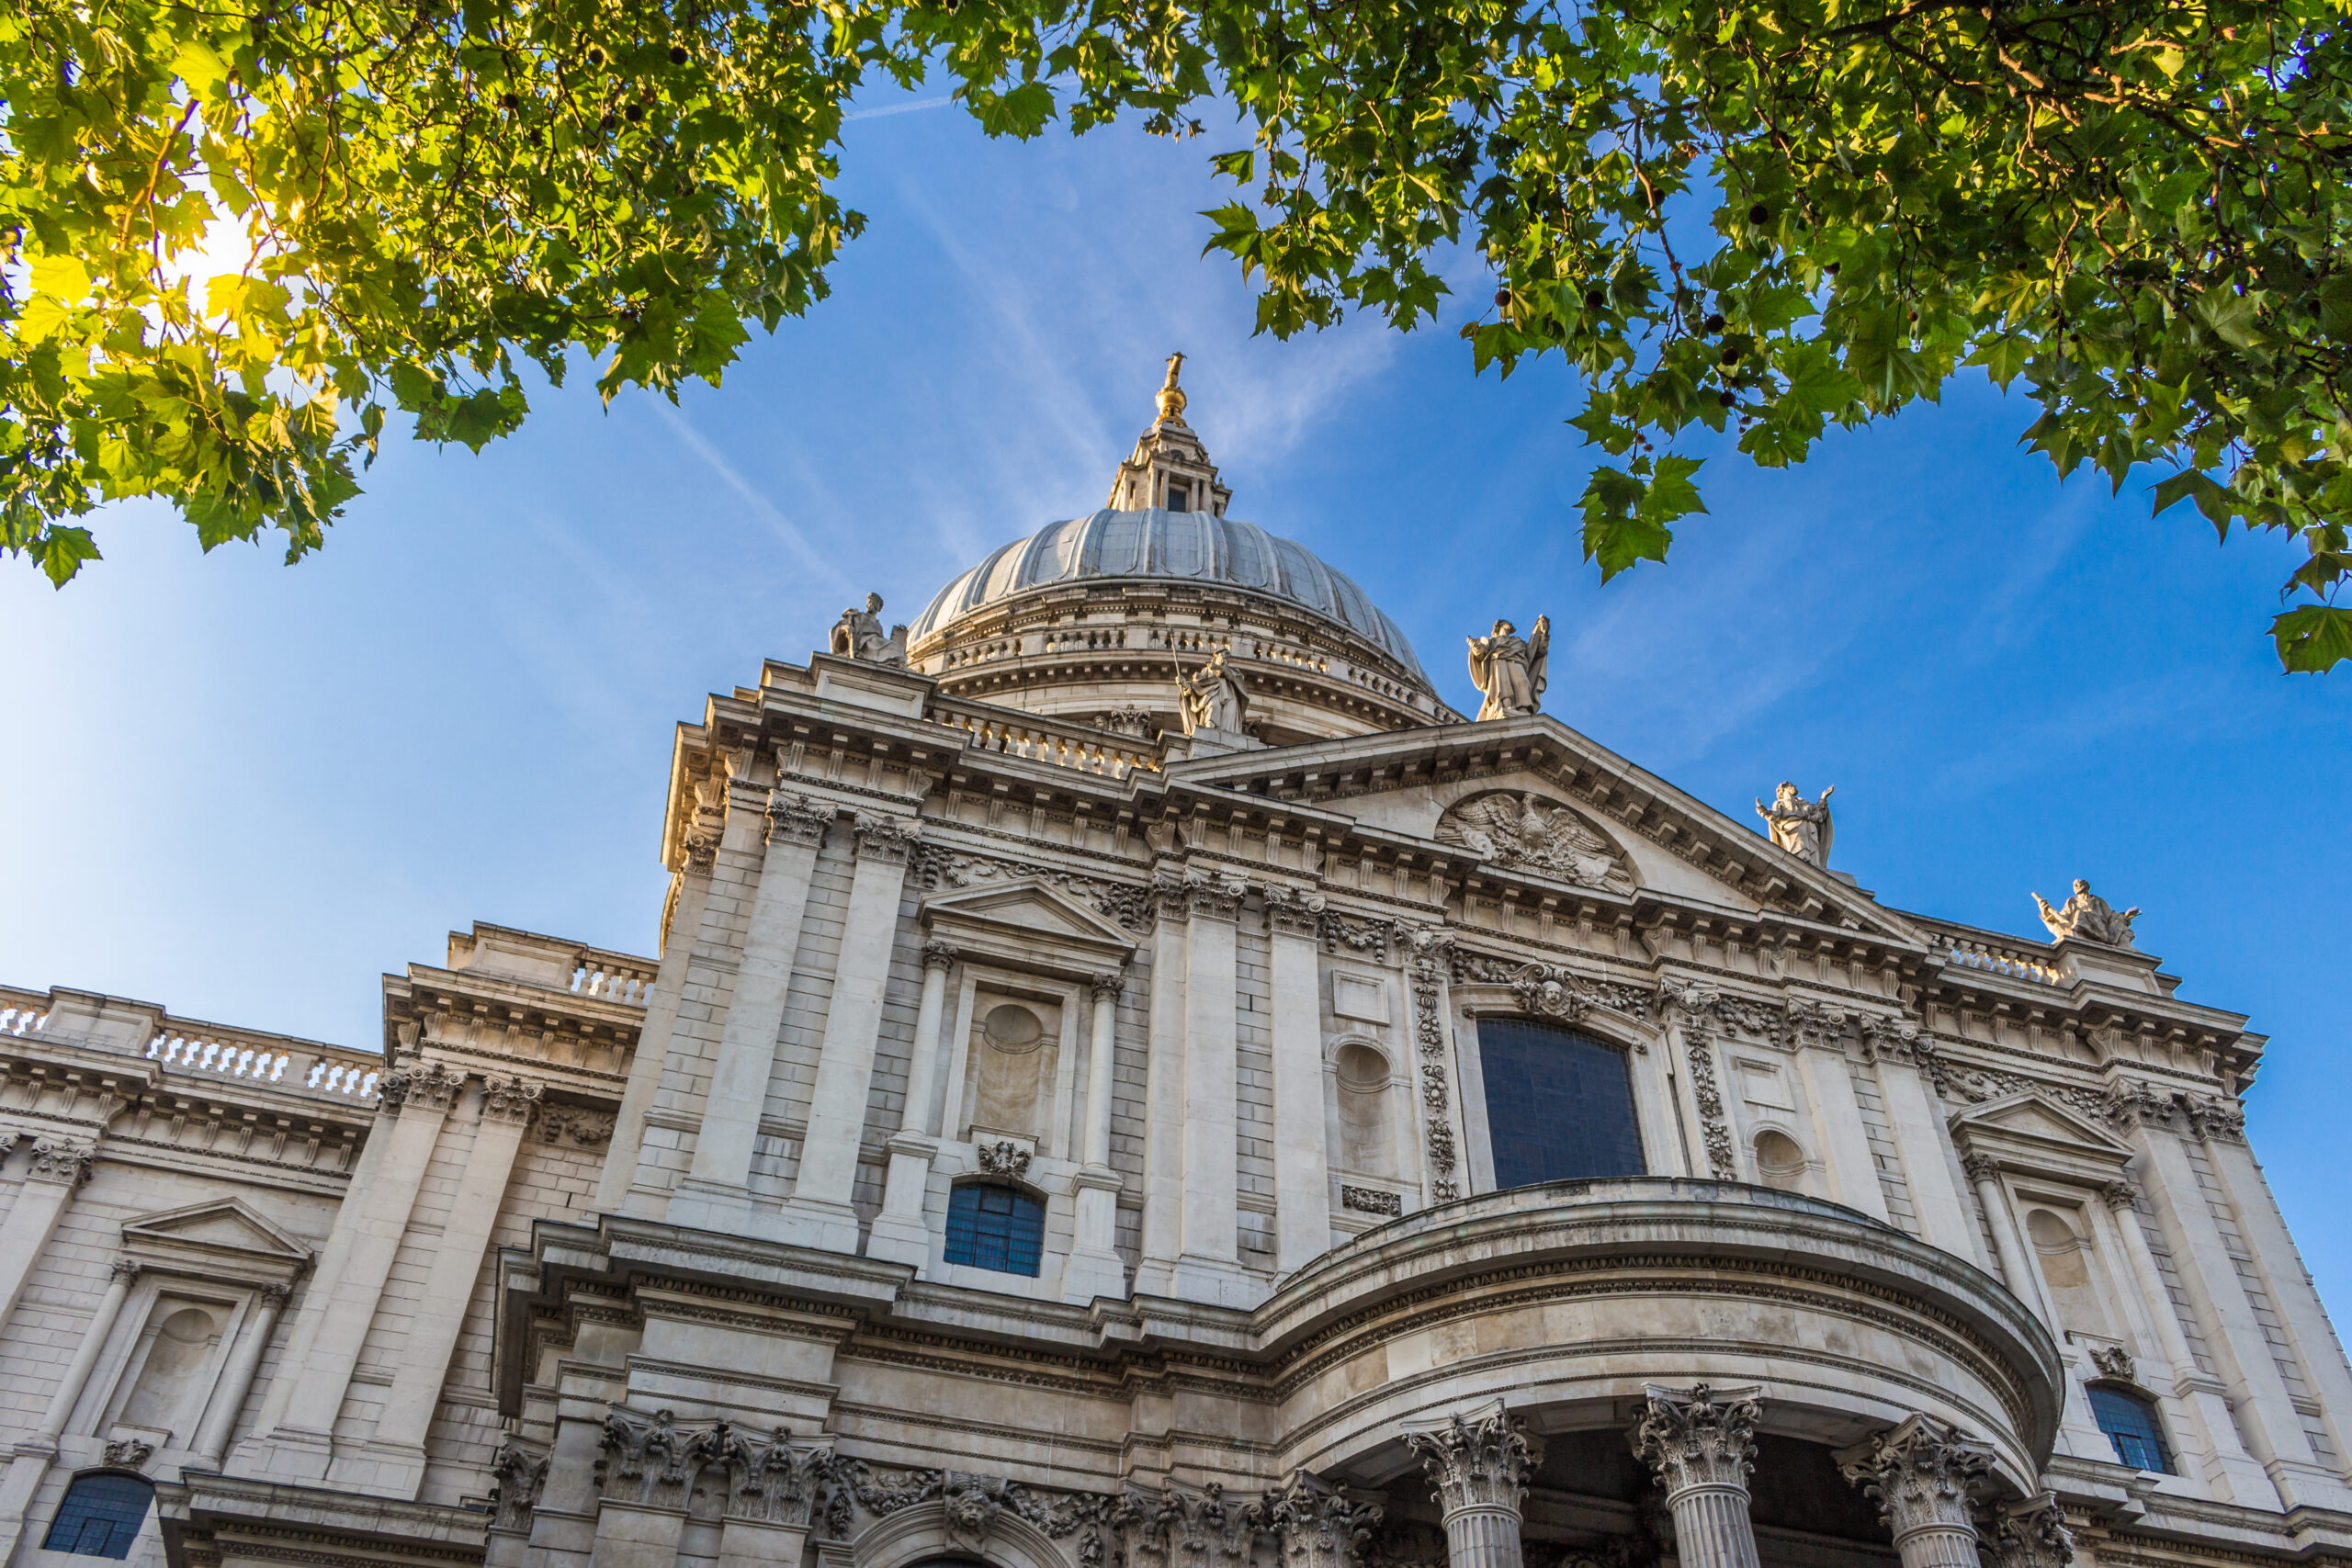 St. Paul's cathedral on a sunny day